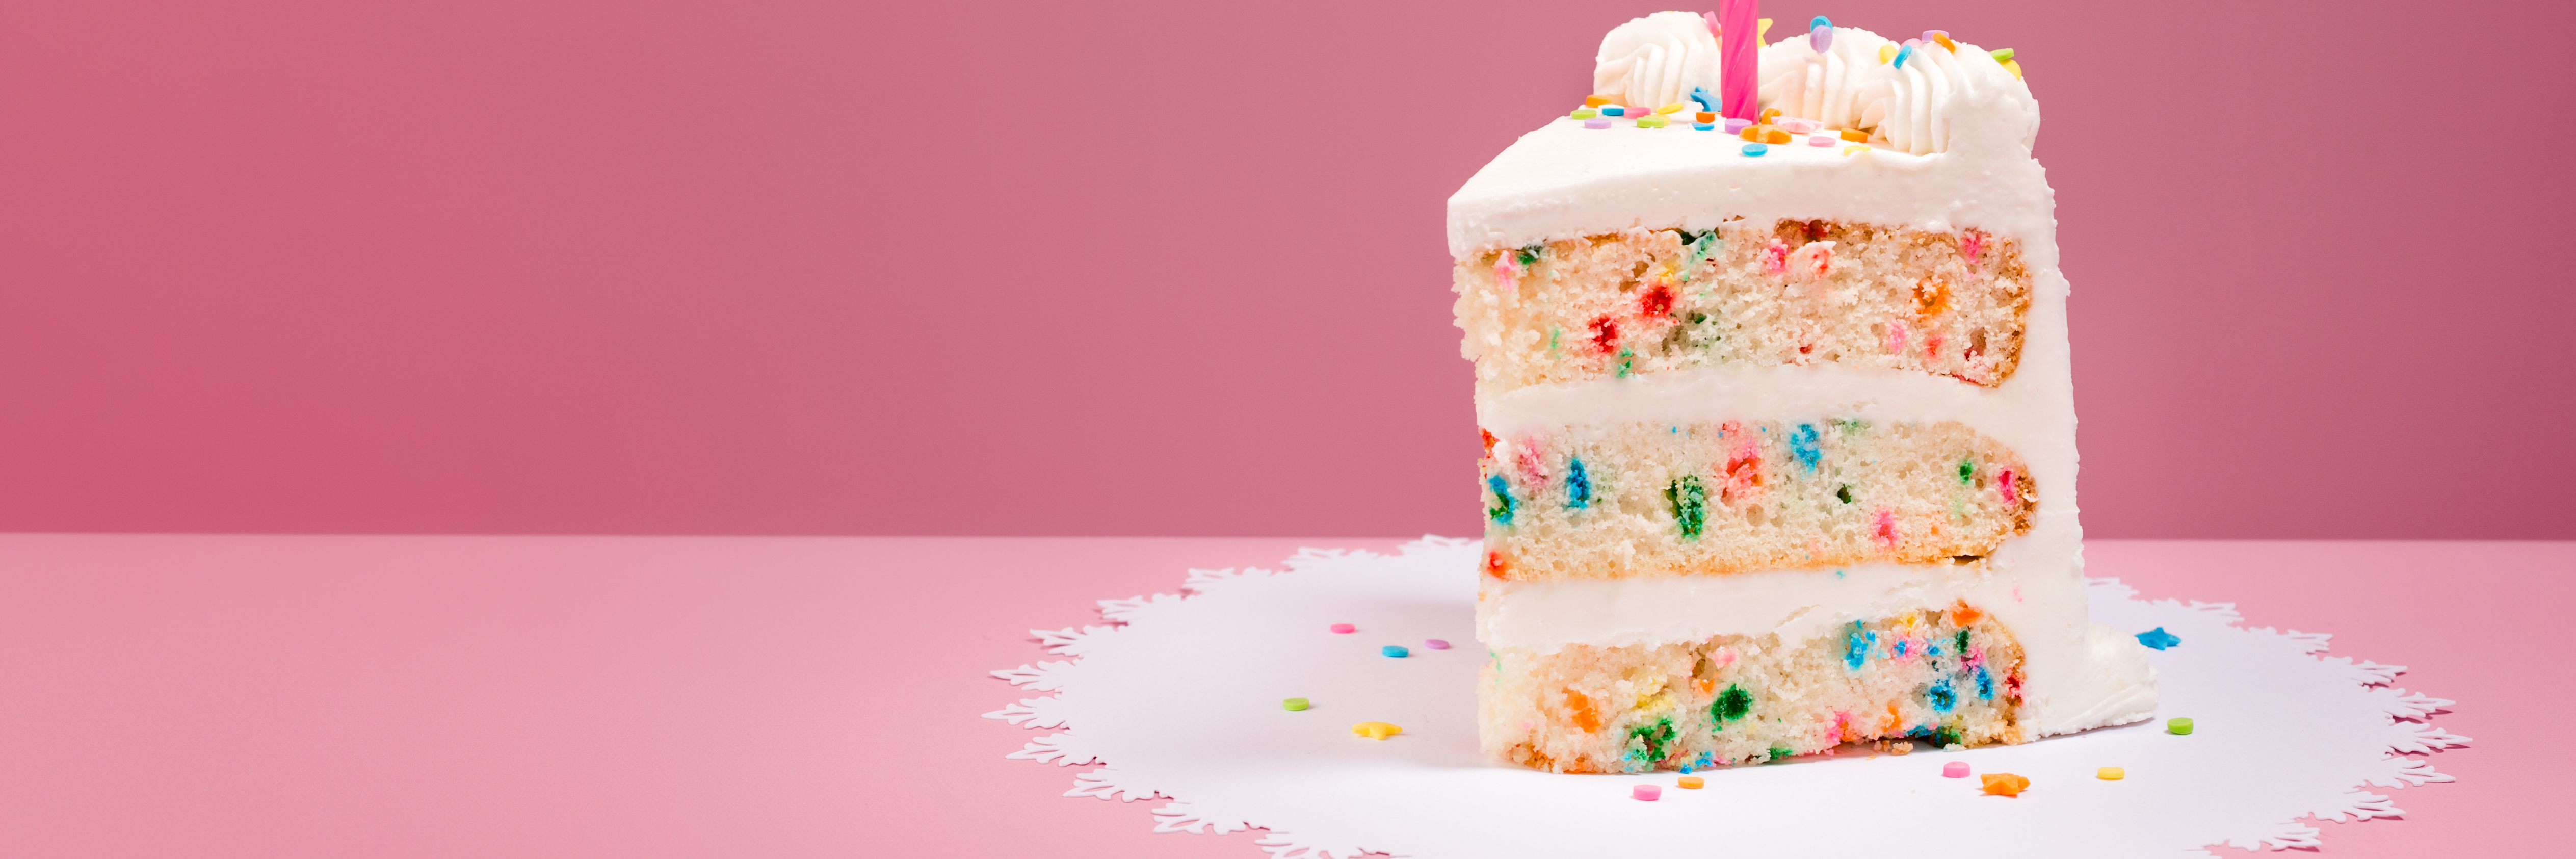 Slice of Colourful Birthday Confetti Cake with a lit candle over a pink background.